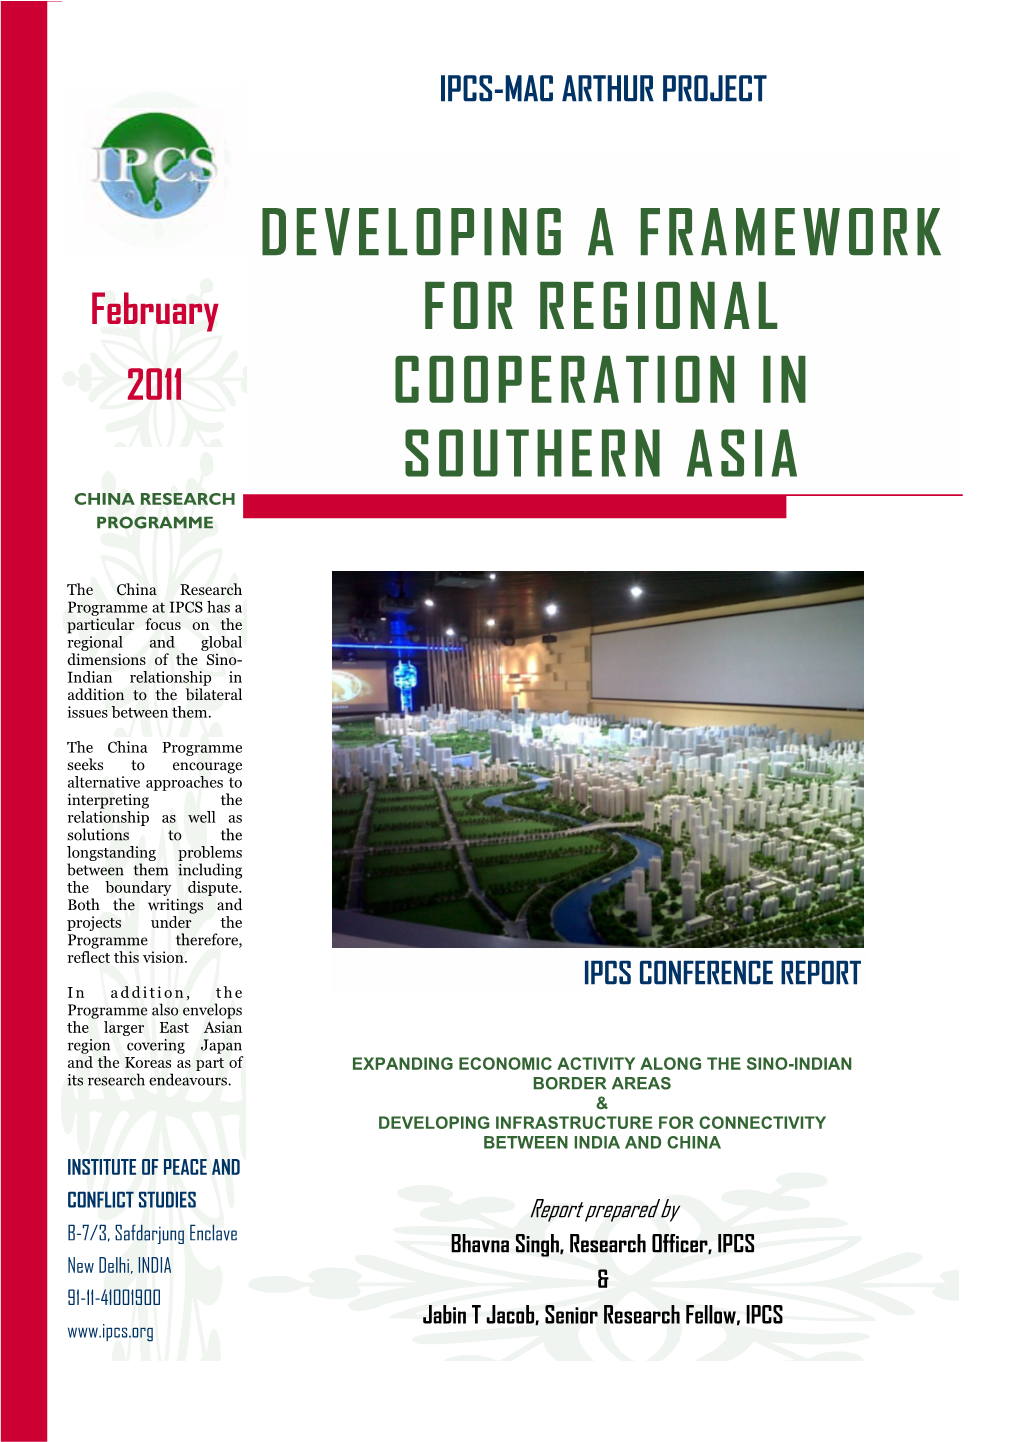 Developing a Framework for Regional Cooperation in Southern Asia